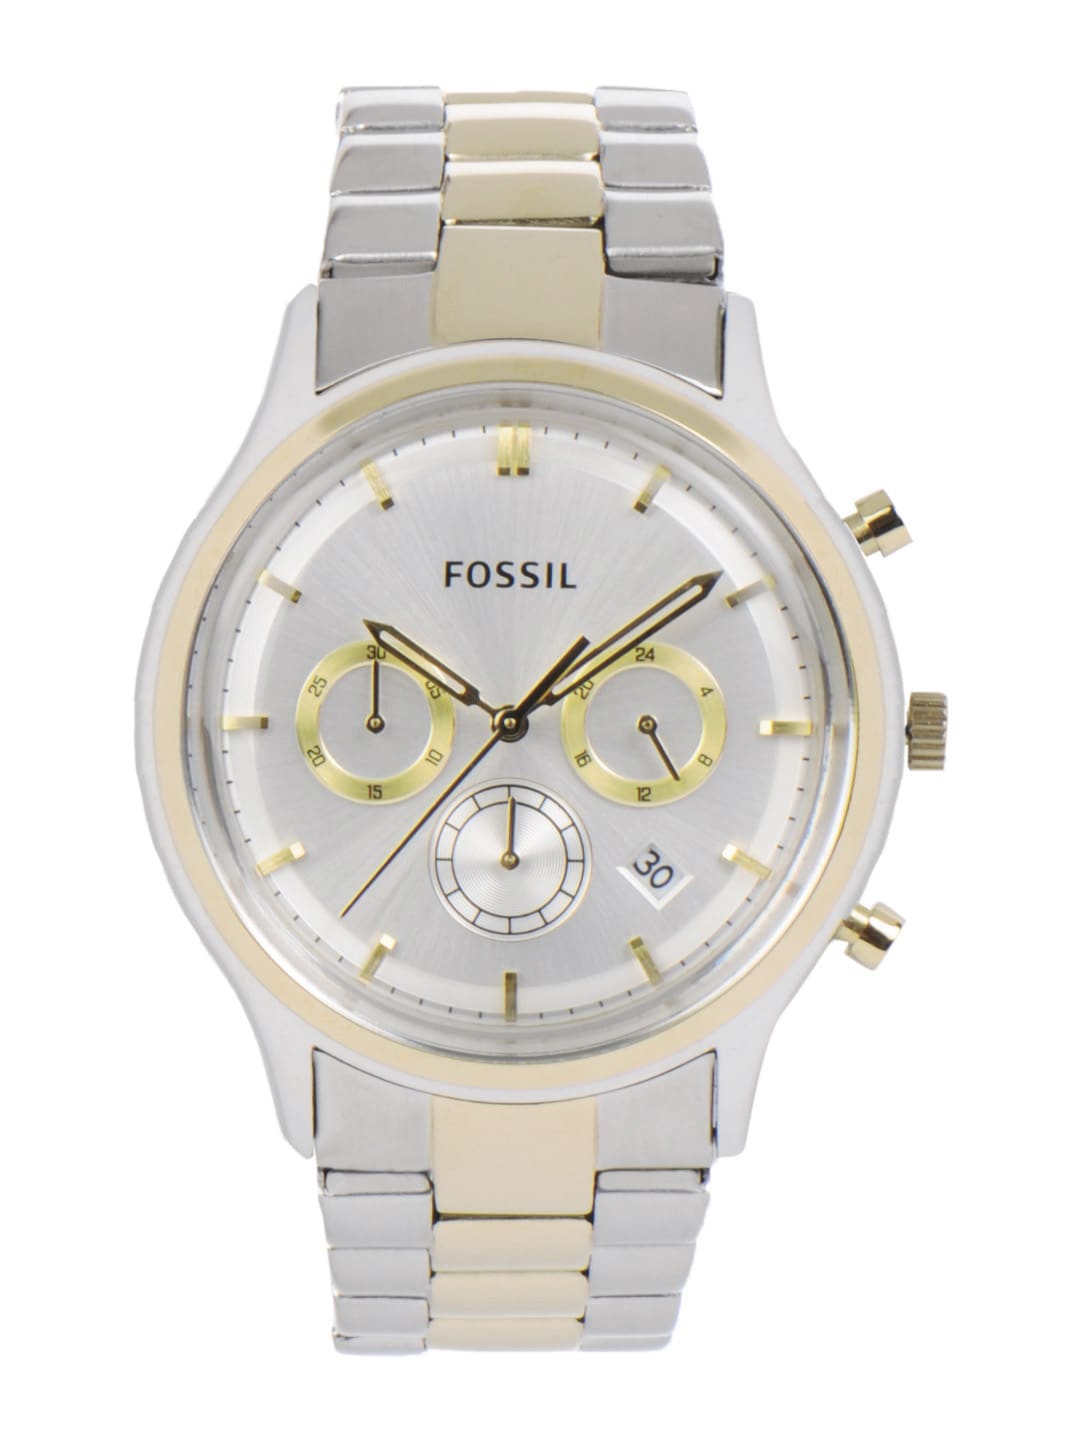 Fossil Men Silver-Toned Dial Chronograph Watch FS4643